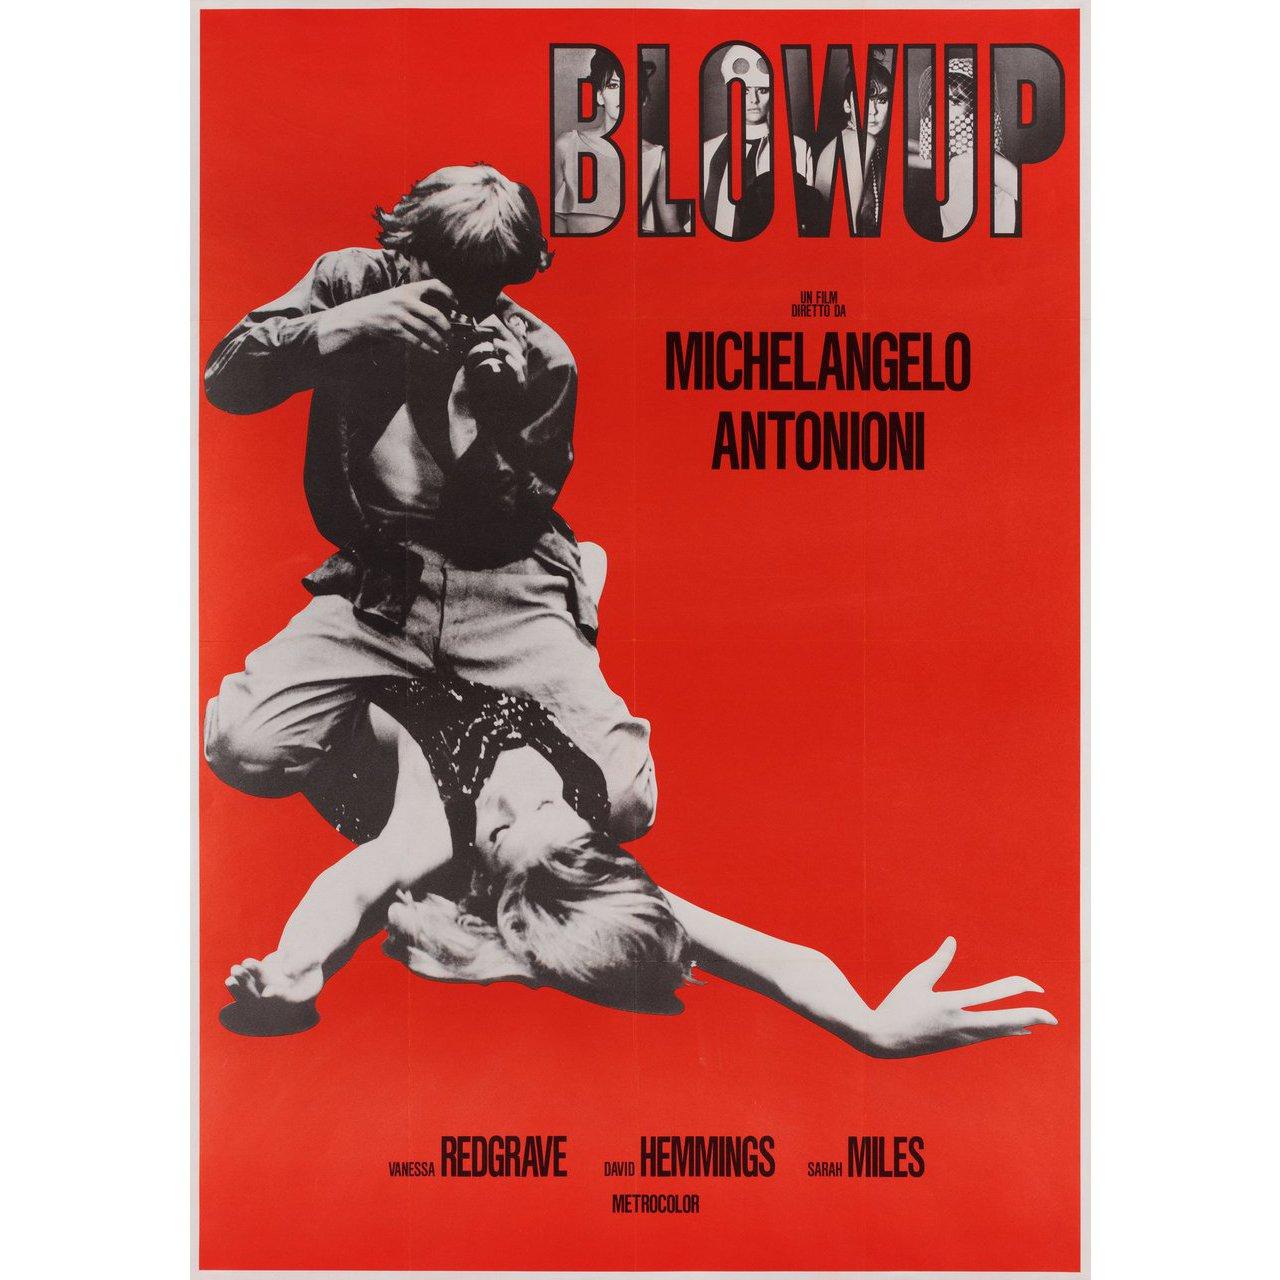 Original 2000s re-release Japanese B2 poster for the 1966 film Blow-Up (Blow Up) directed by Michelangelo Antonioni with Vanessa Redgrave / Sarah Miles / David Hemmings / John Castle. Very Good-Fine condition, rolled. Please note: the size is stated